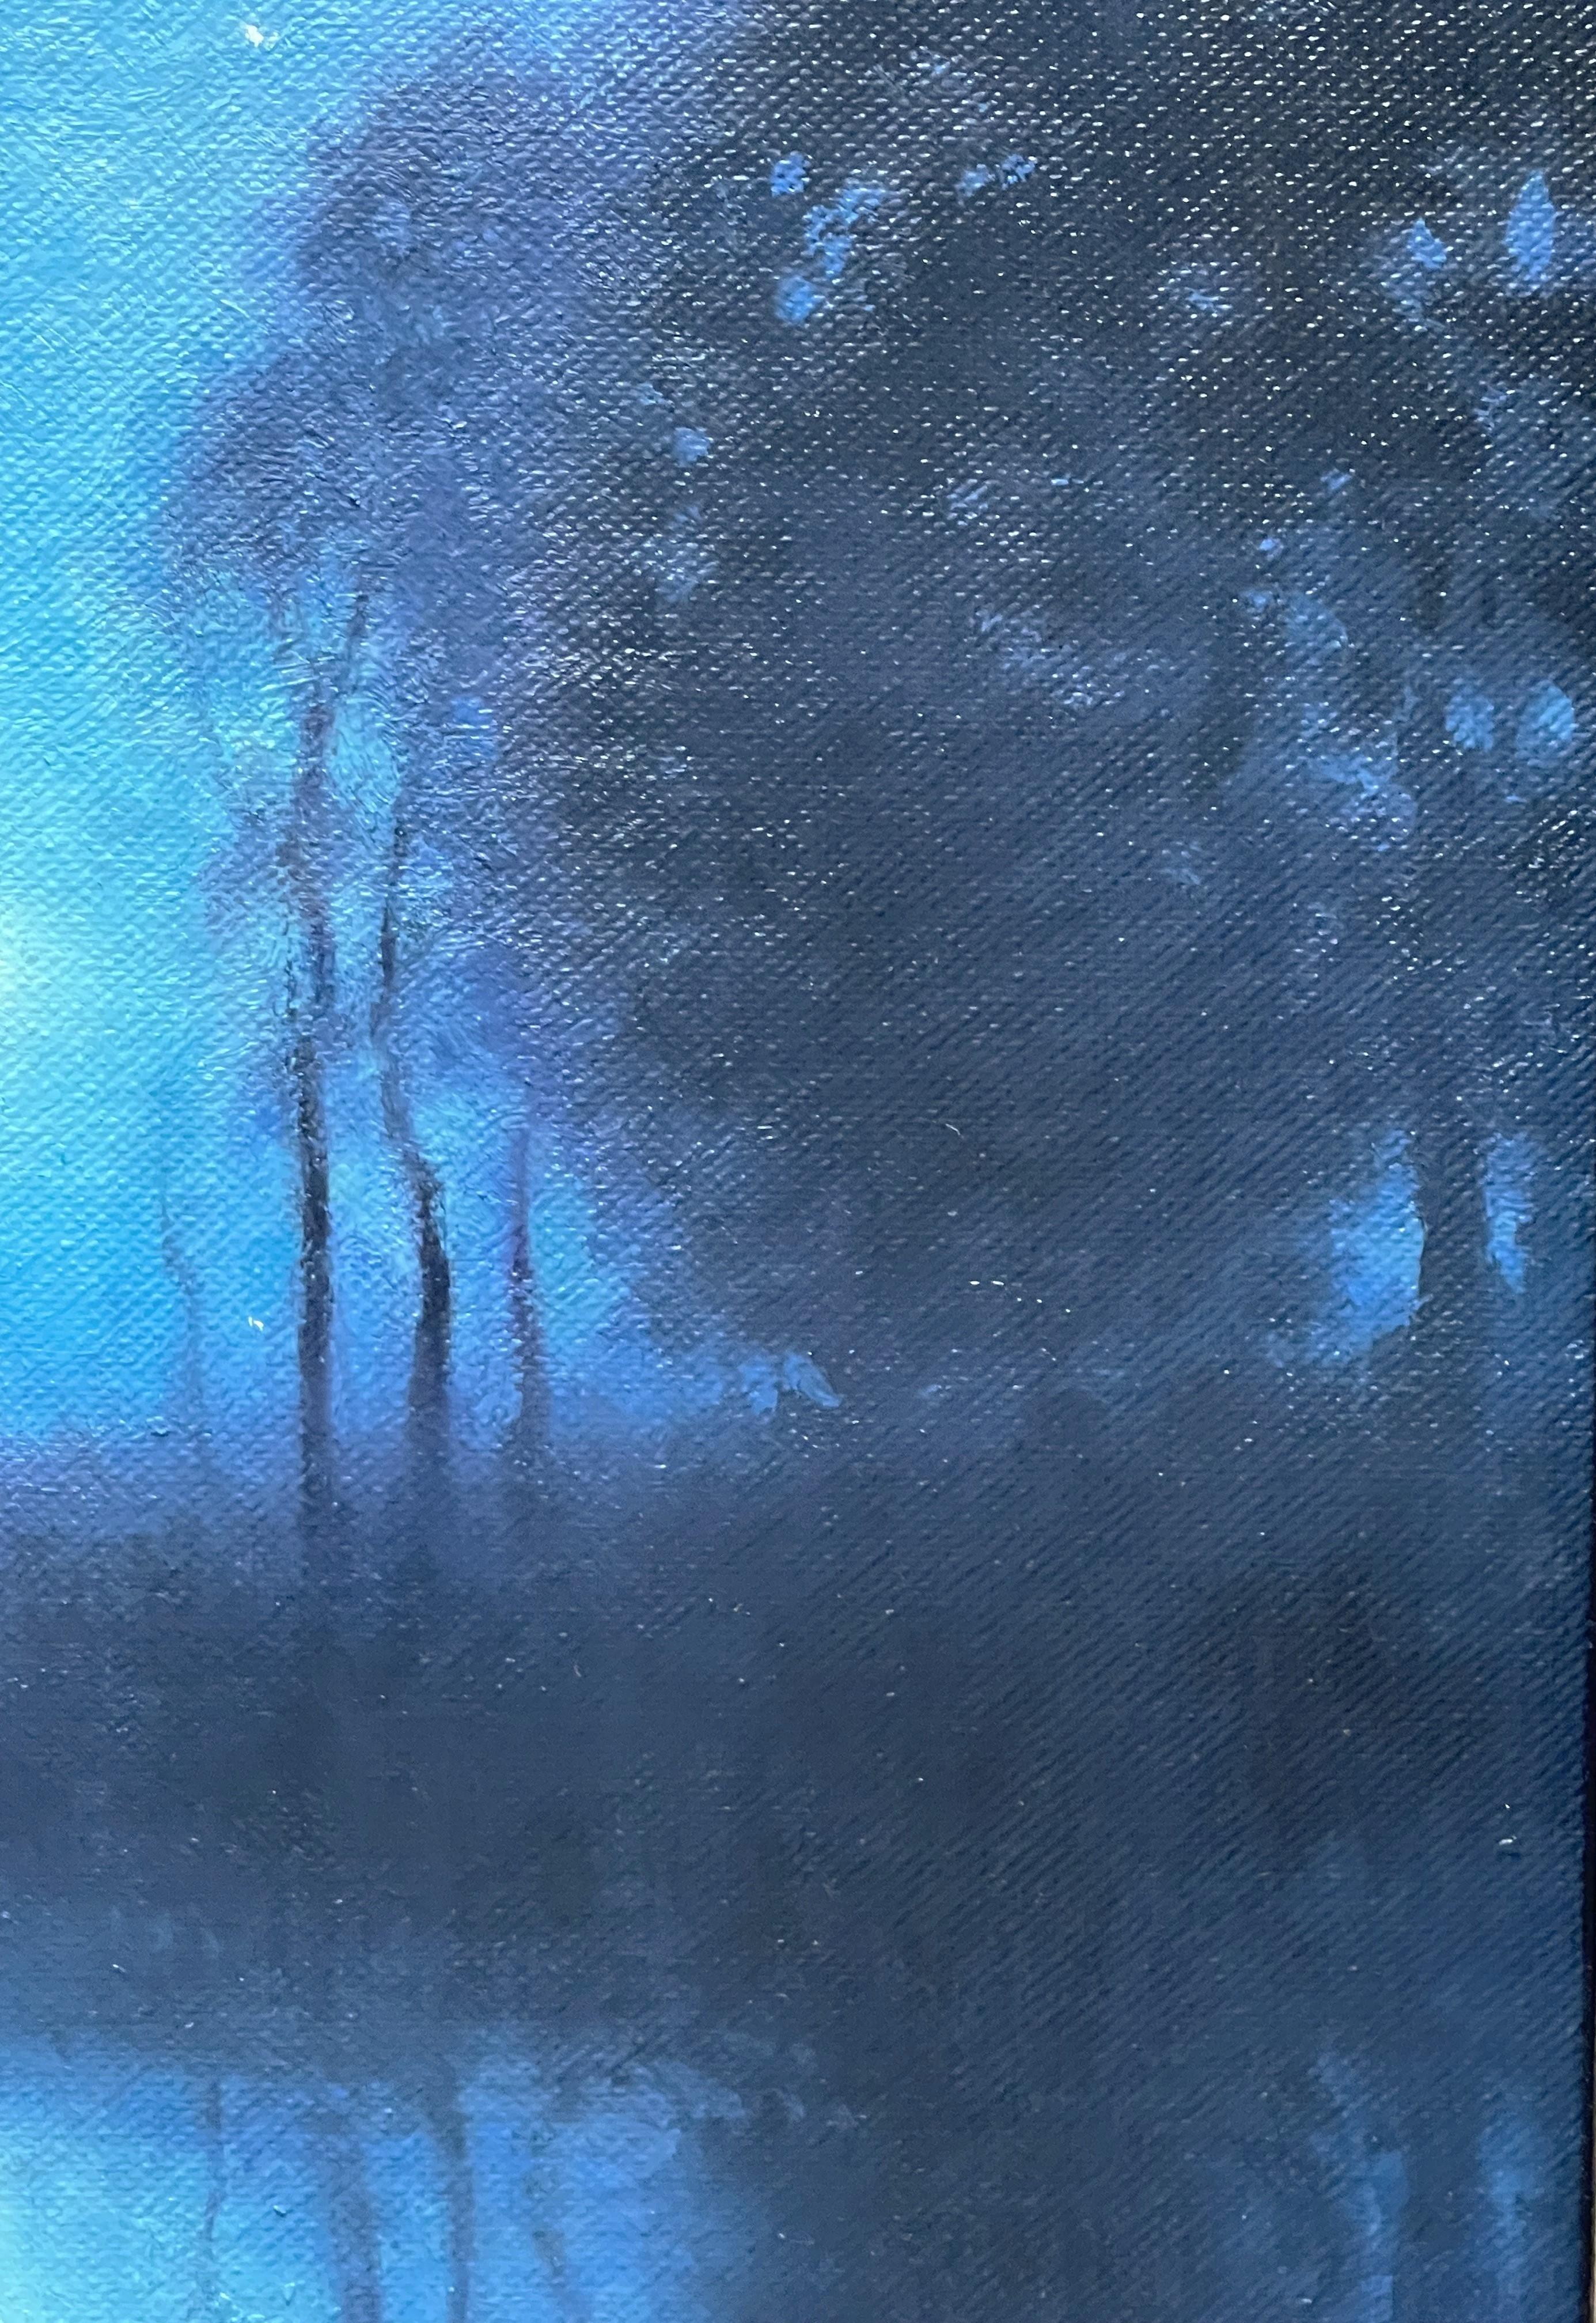  Impressionistic Moonlight Landscape Oil Painting Michael Budden  For Sale 3